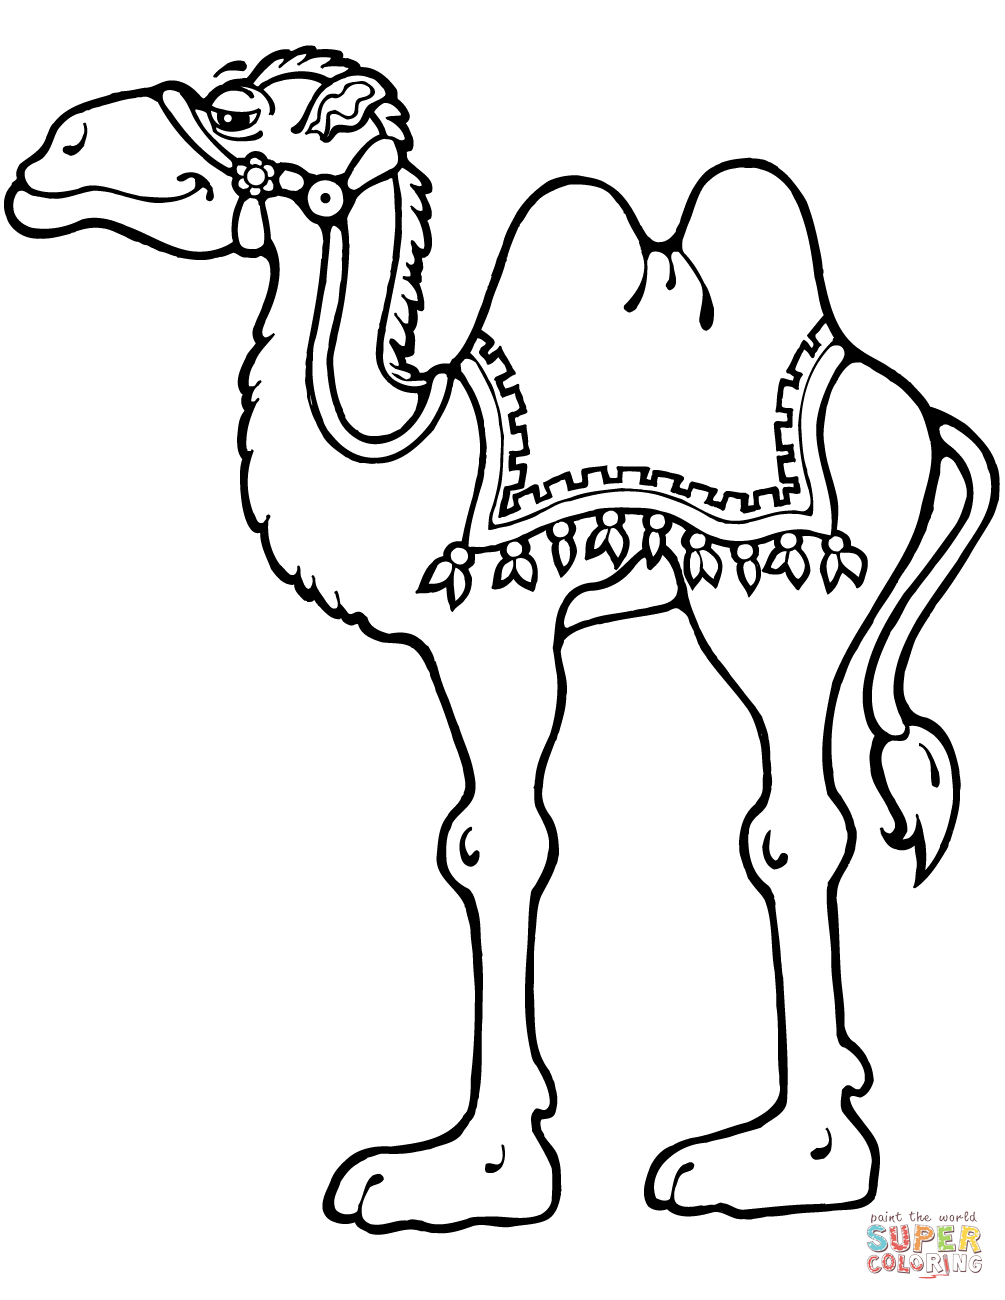 Camel Coloring Page Cartoon Animals Pages For Kids Printable Free | Ribsvigyapan Pluspng.com Camel Coloring Pages. Camel Coloring Page. Camel Coloring Pages For Hdpng.com  - Camel Black And White, Transparent background PNG HD thumbnail